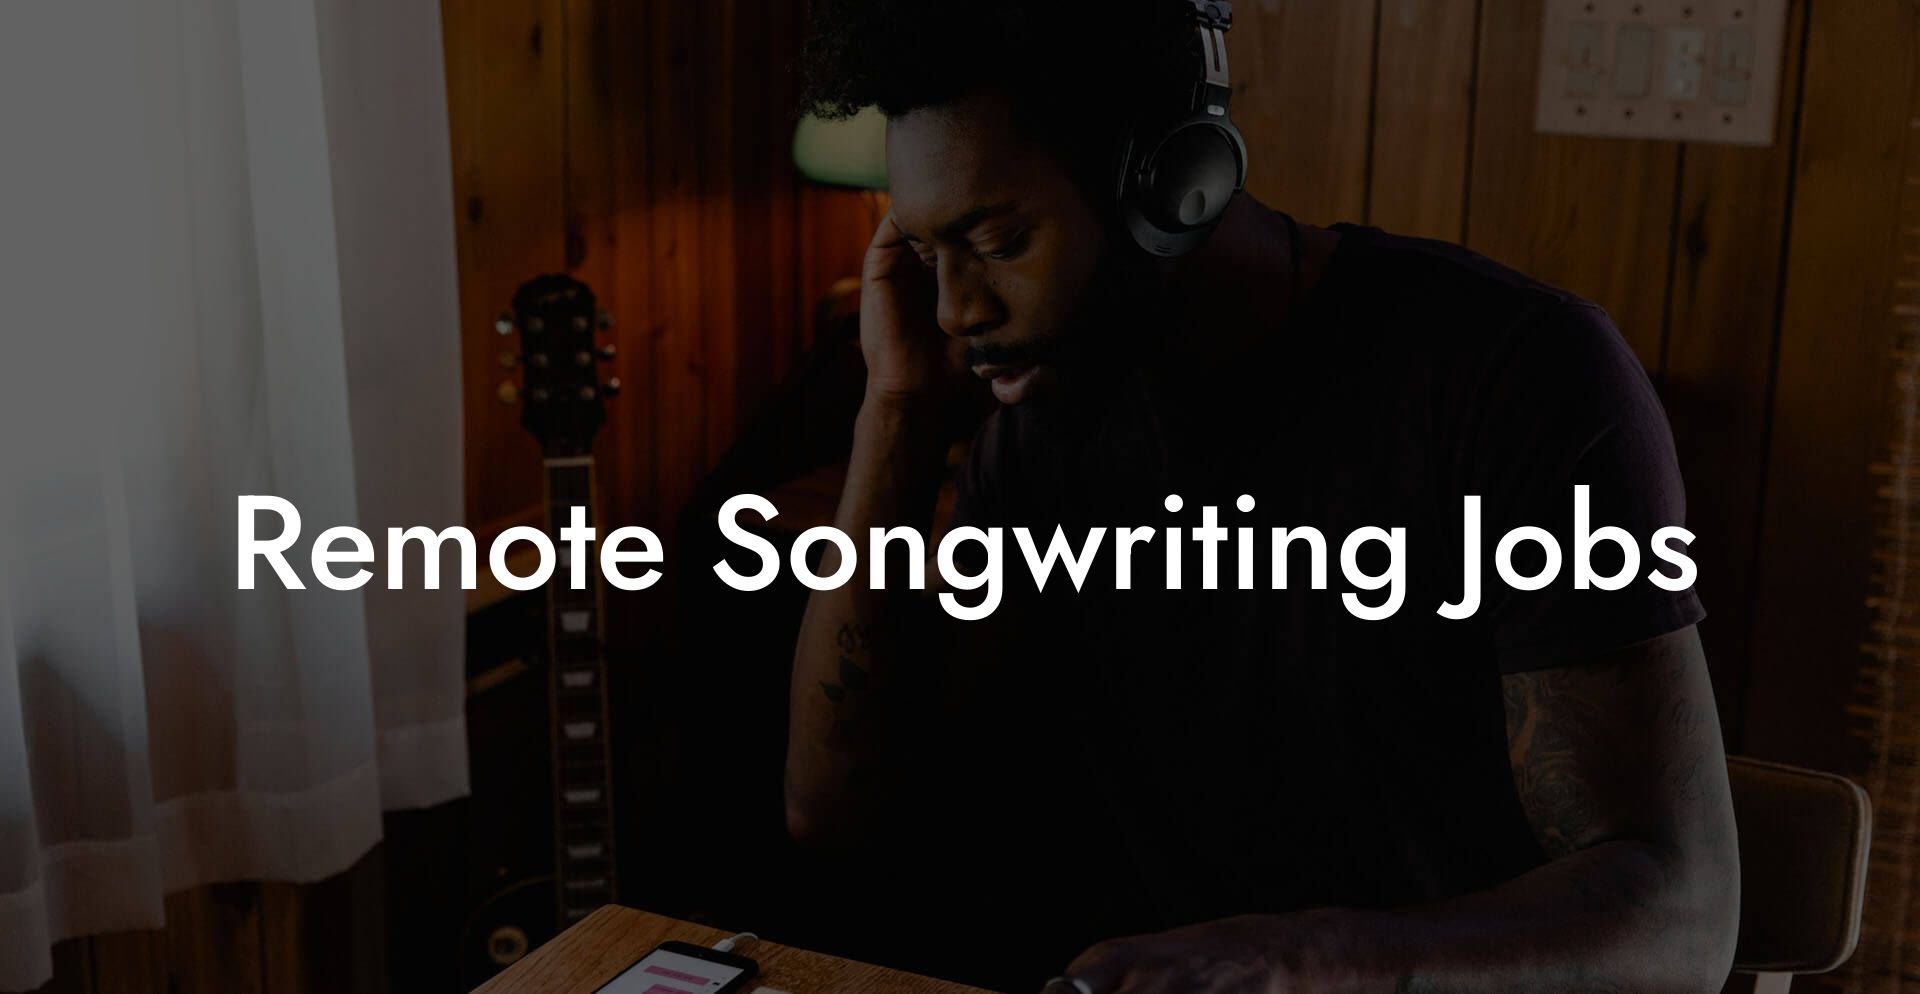 remote songwriting jobs lyric assistant